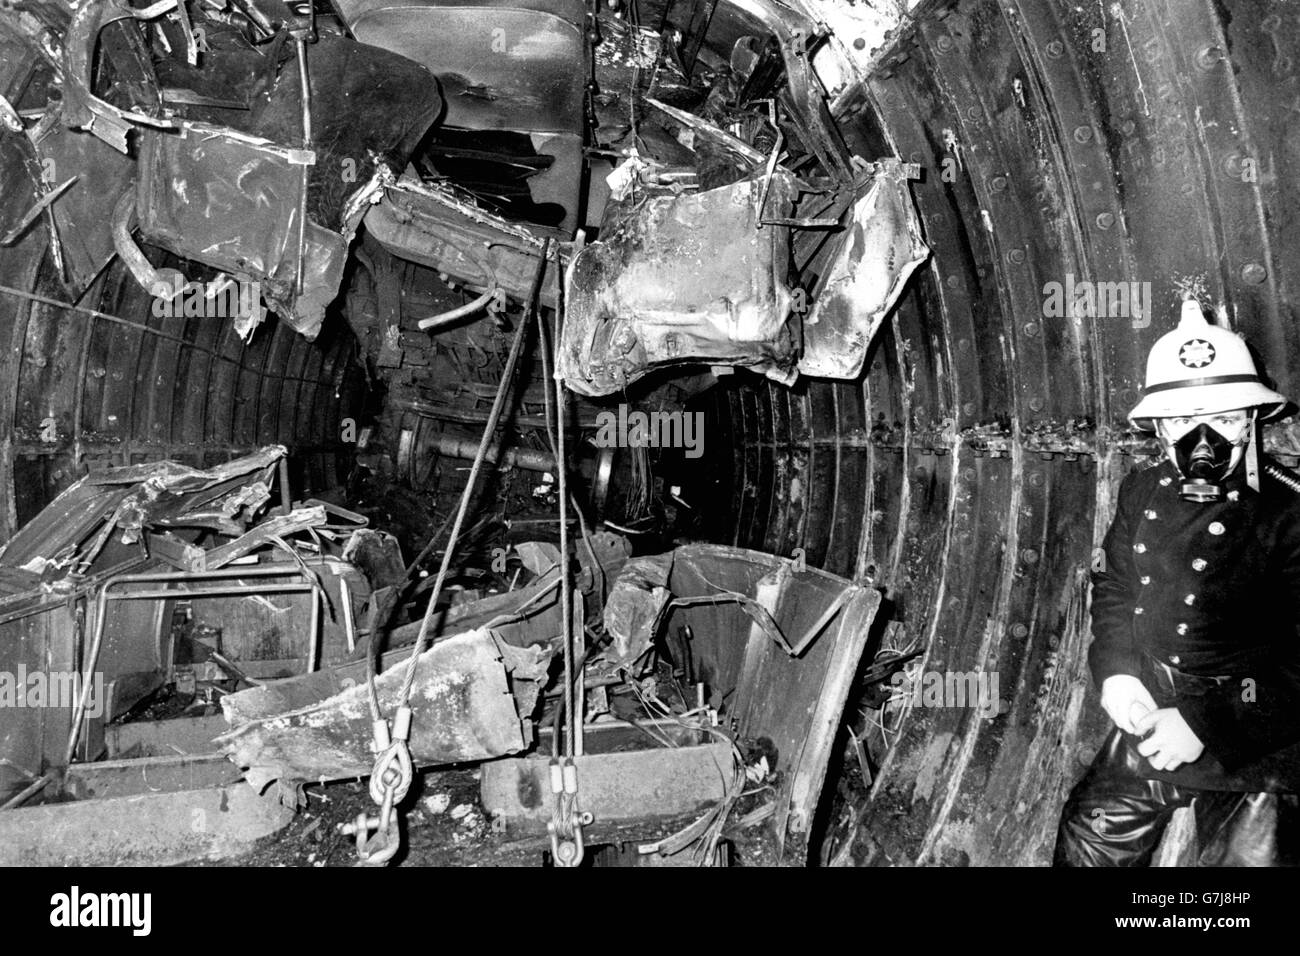 Squashed against the roof of the Tube tunnel at Moorgate is the first coach of the train that smashed into the tunnel wall. Amid the wreckage are the front bogie wheels from the second coach. The foul air forces the fireman to wear a breathing mask. Stock Photo